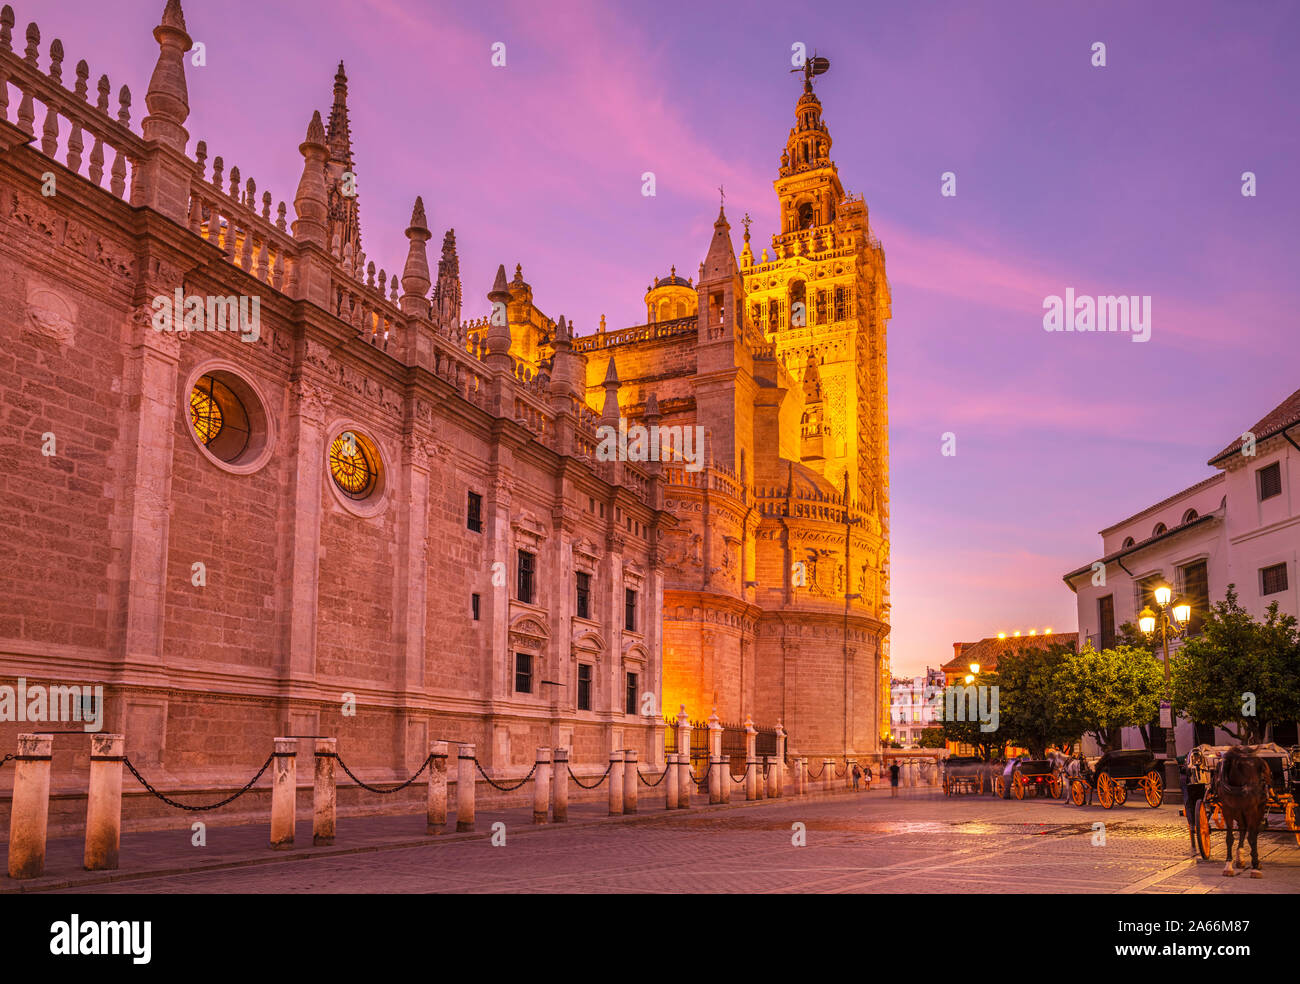 Seville sunset Sevilla Seville Spain Seville cathedral Seville and the Seville General Archive of the Indies building at night Seville Spain EU Europe Stock Photo